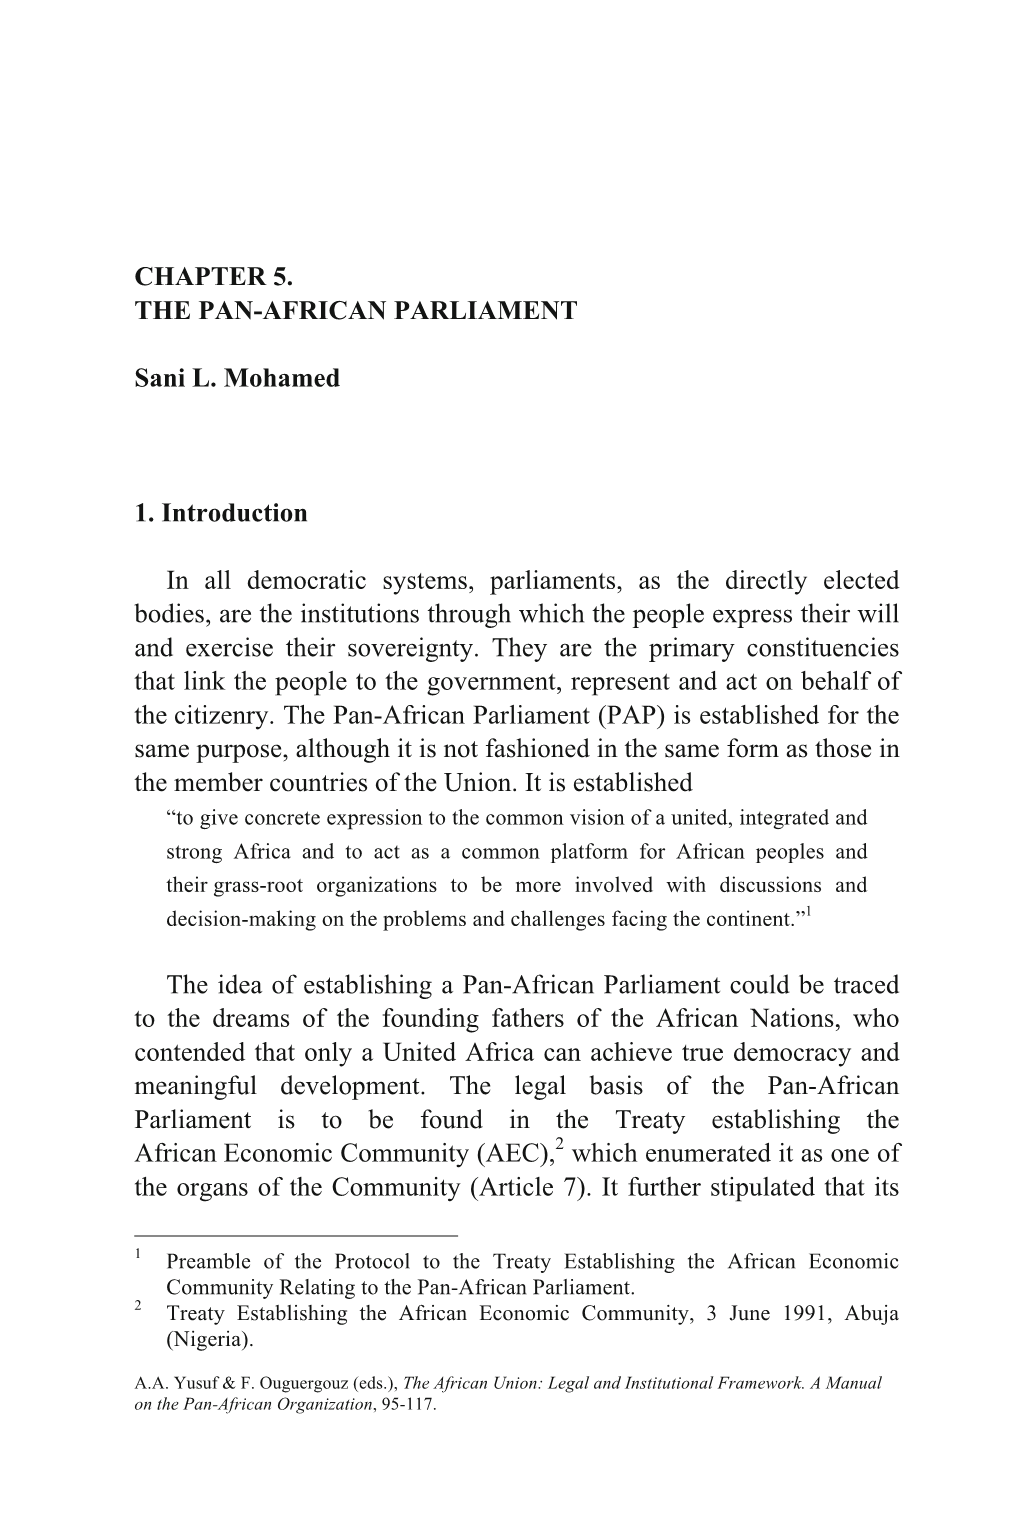 CHAPTER 5. the PAN-AFRICAN PARLIAMENT Sani L. Mohamed 1